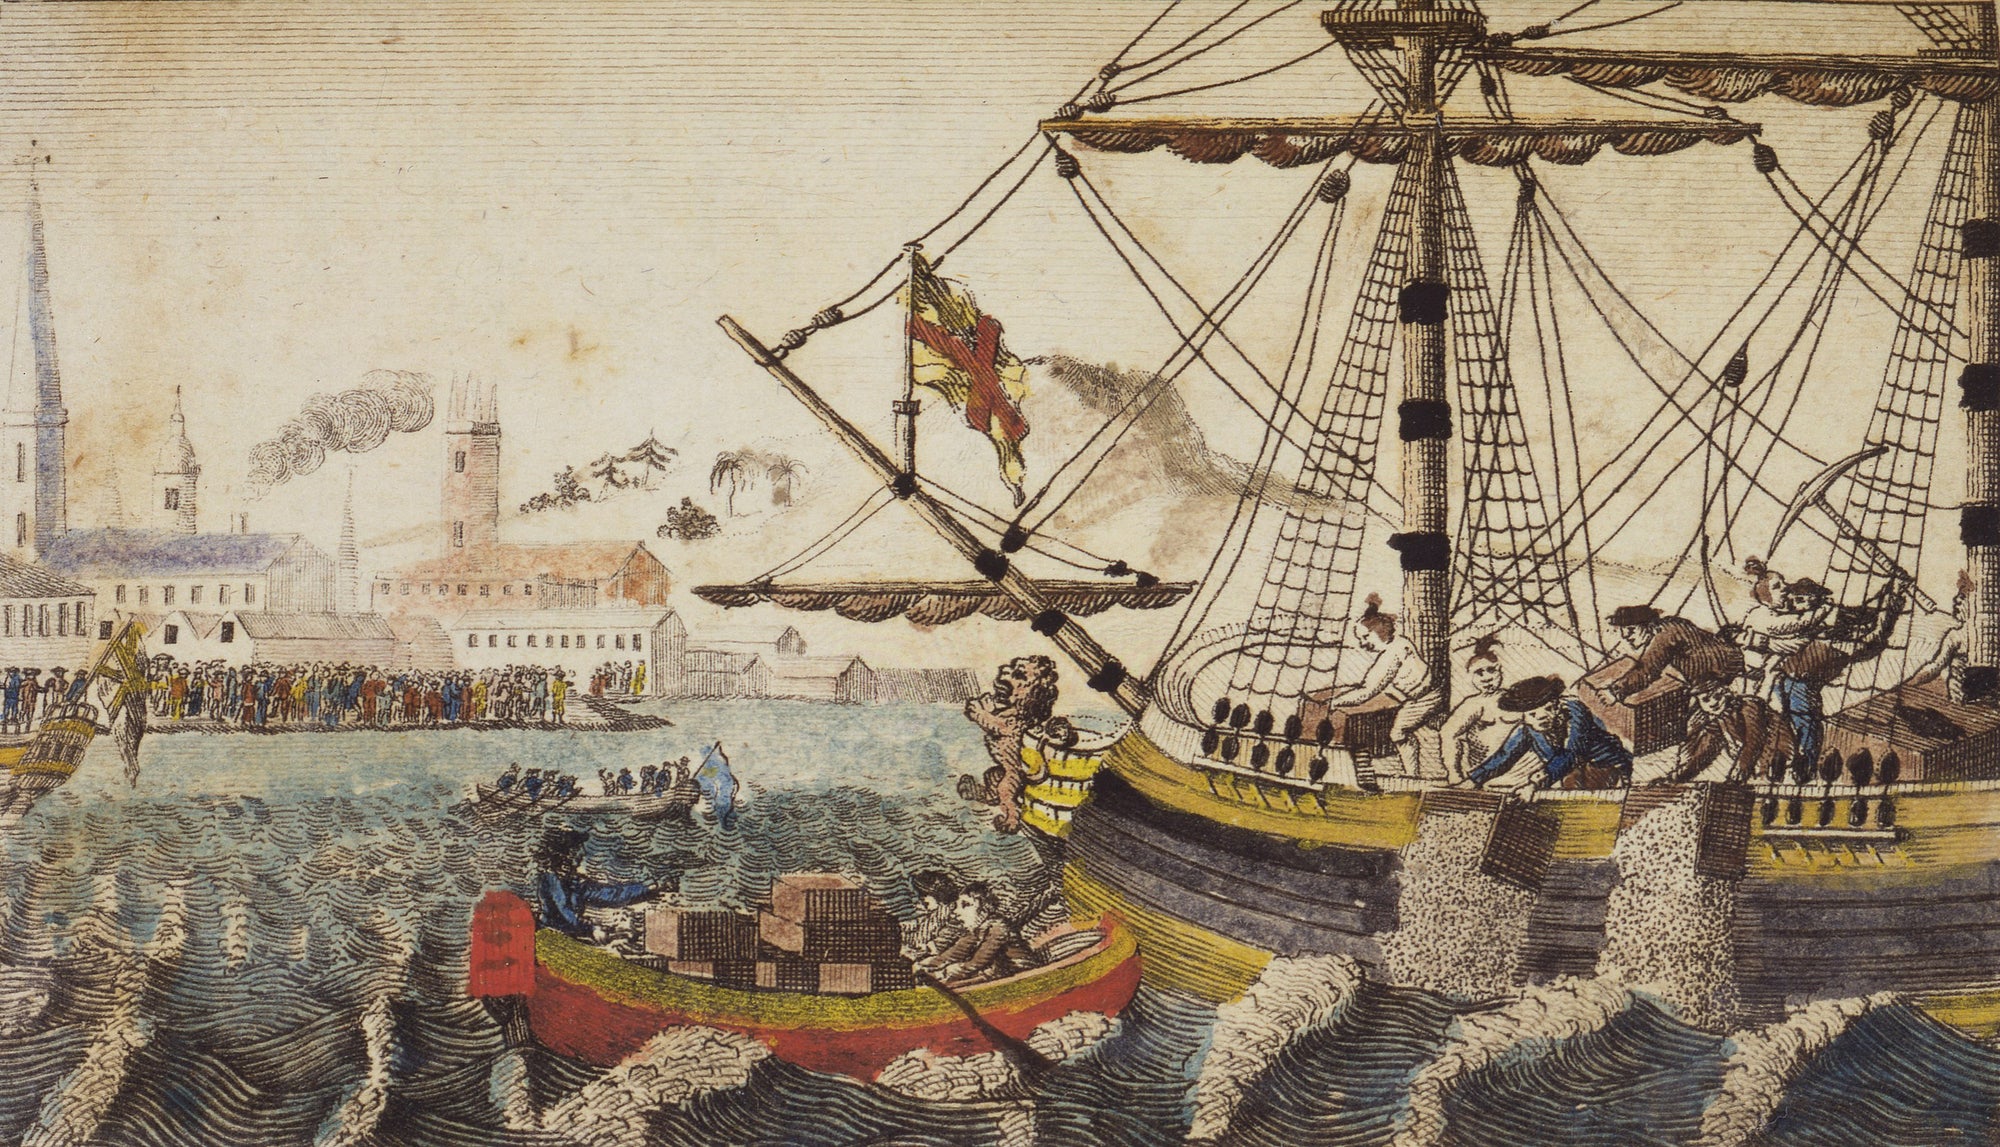 Scene from the Boston Tea Party